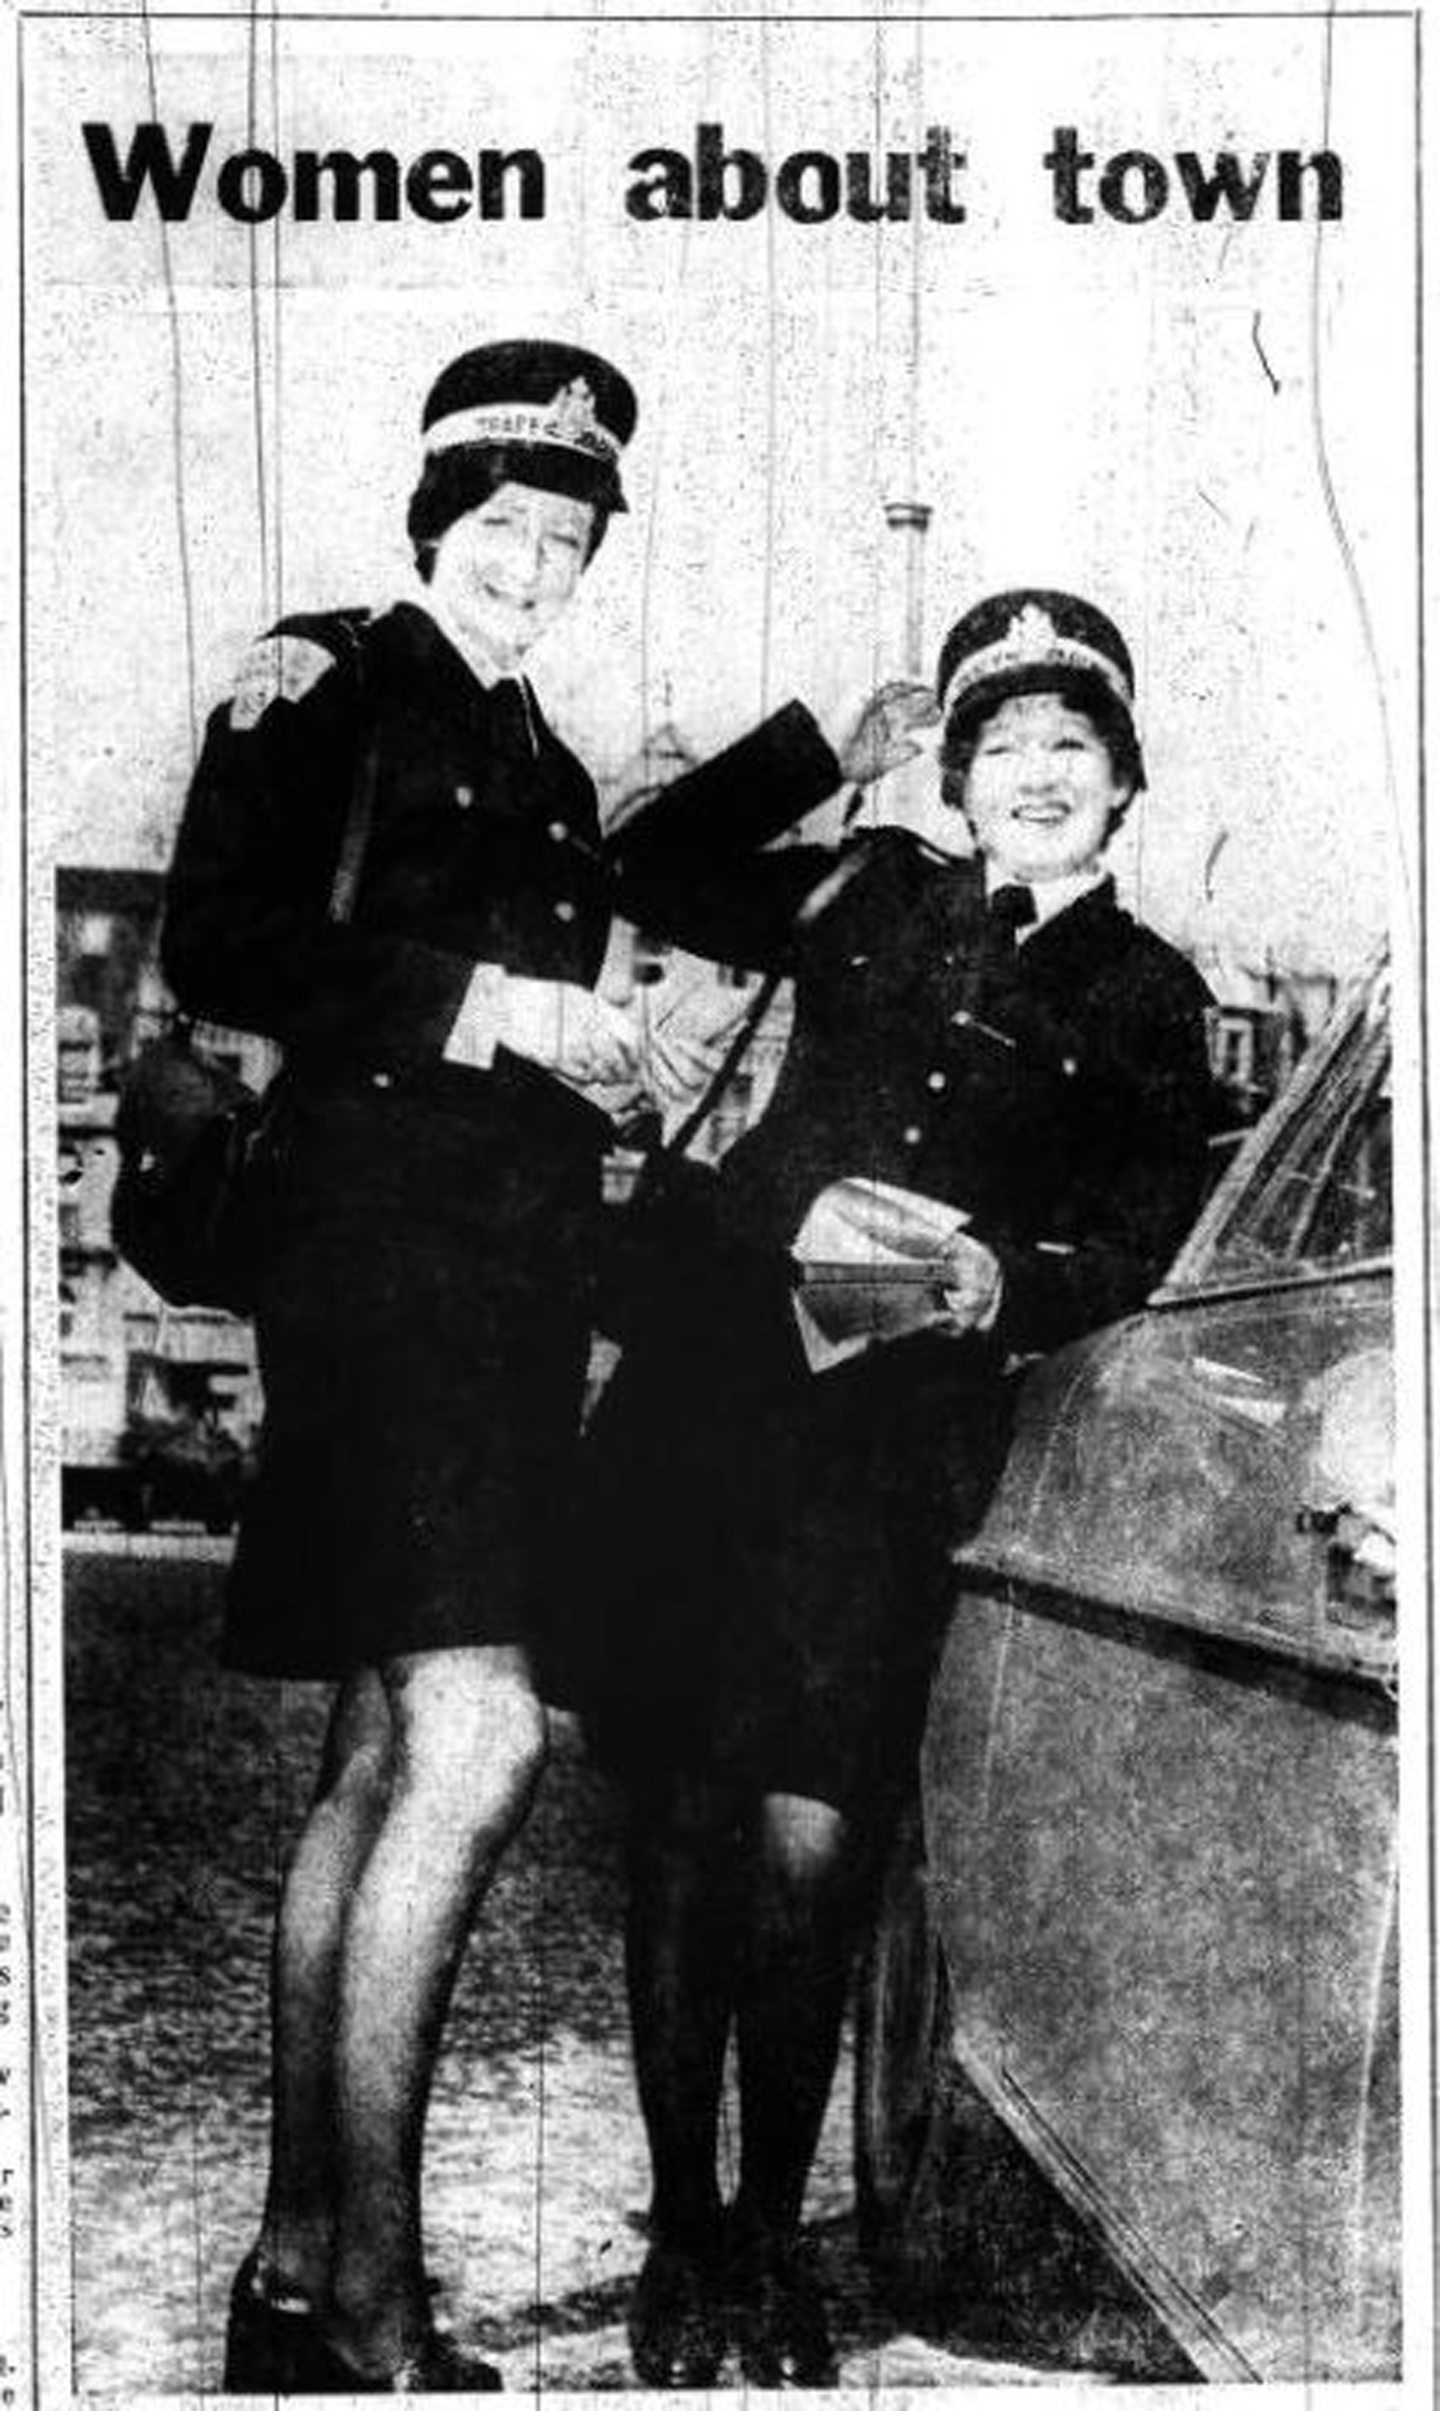 Aberdeen's first female traffic wardens with the caption 'women about town'